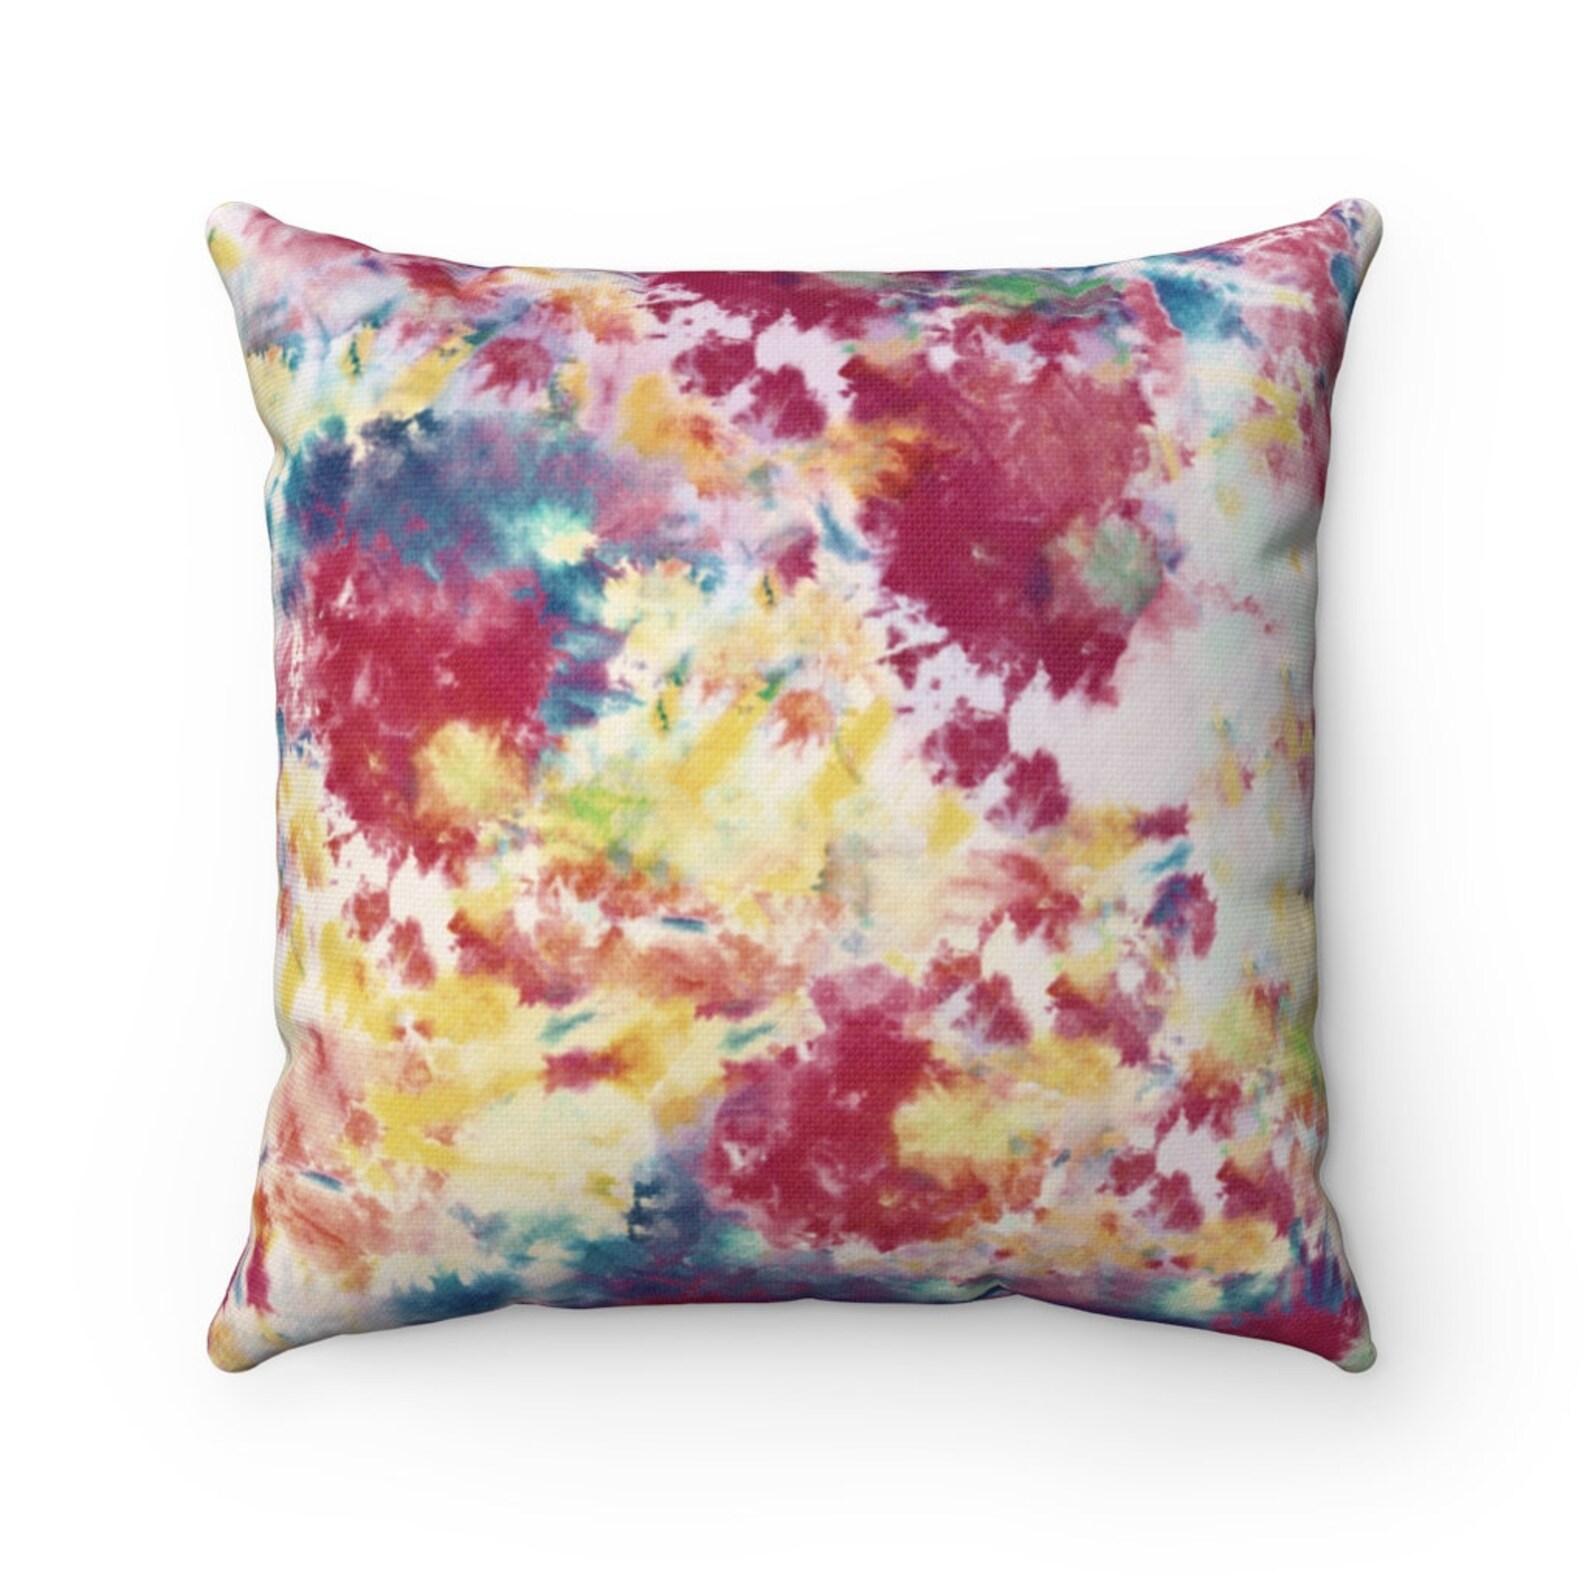 This Beautiful Red and Yellow Tie Dye Throw Pillow is a Great Winter ...